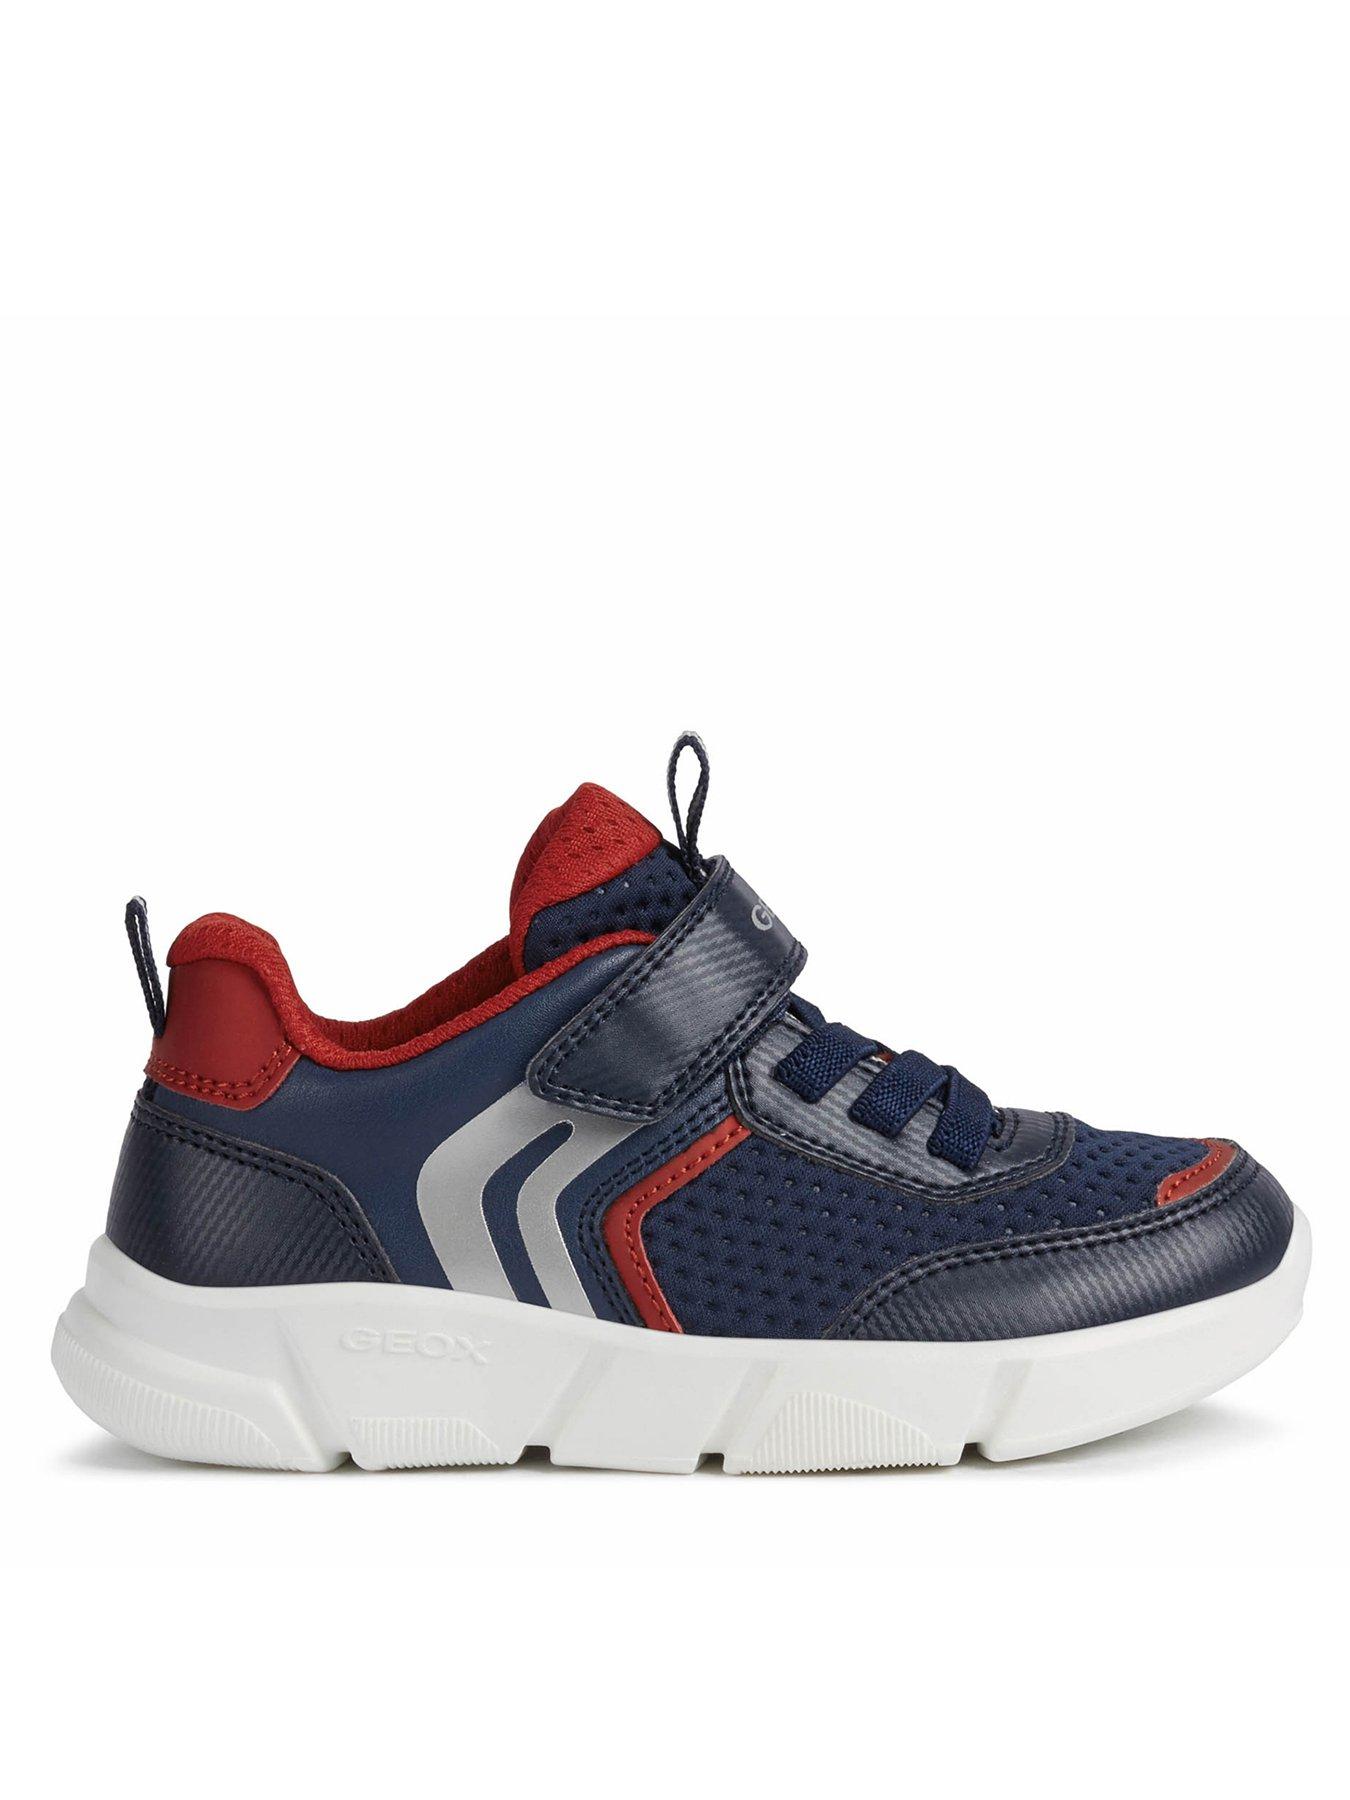 Trainers April Boys Trainer - Navy/Red